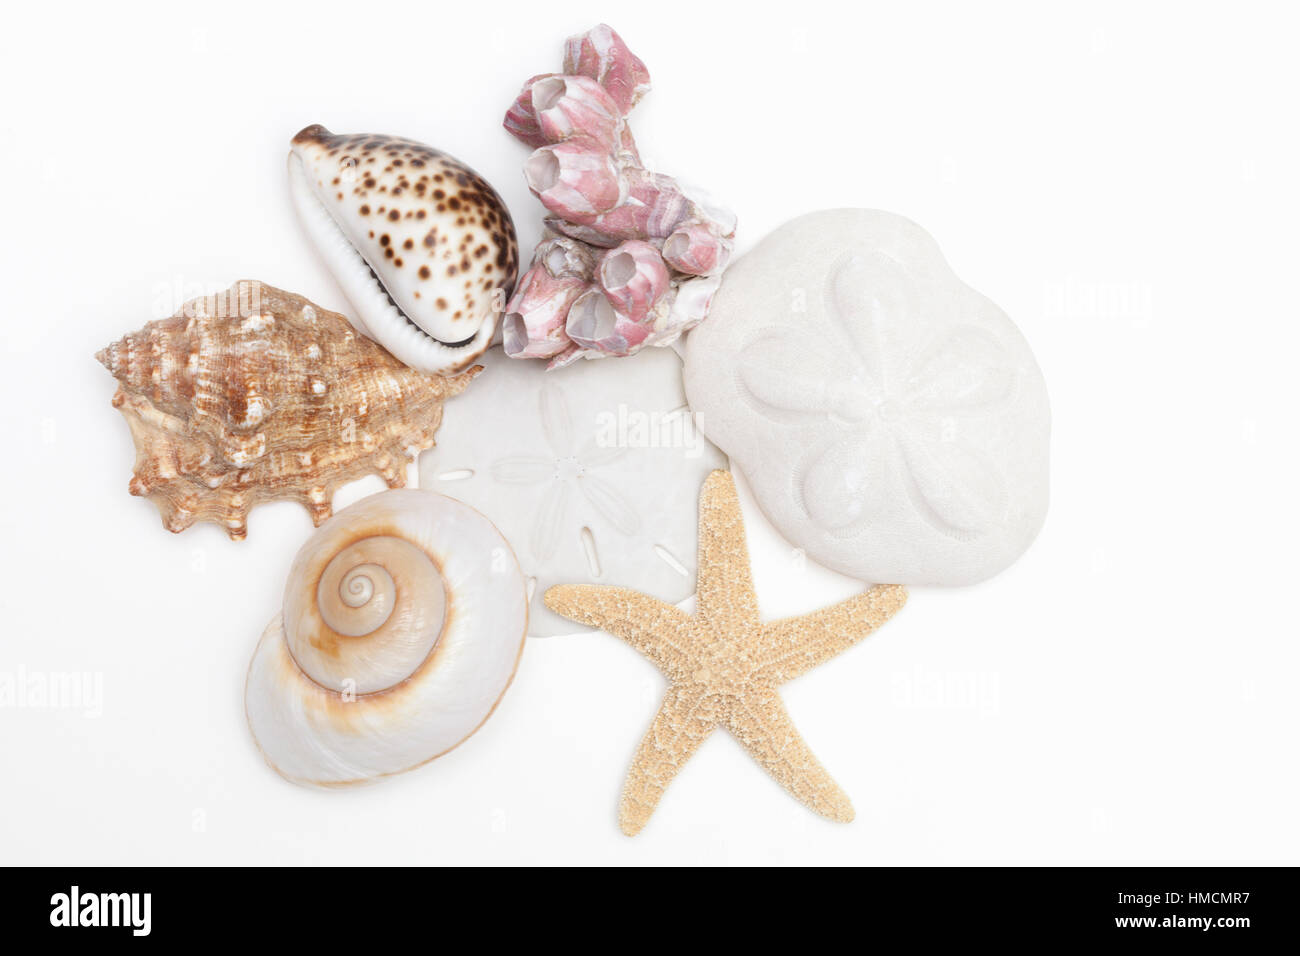 A collection of seashells - a cowrie, moon shell, conch, barnacles, starfish, sand dollar and sea biscuit on a white background. Stock Photo